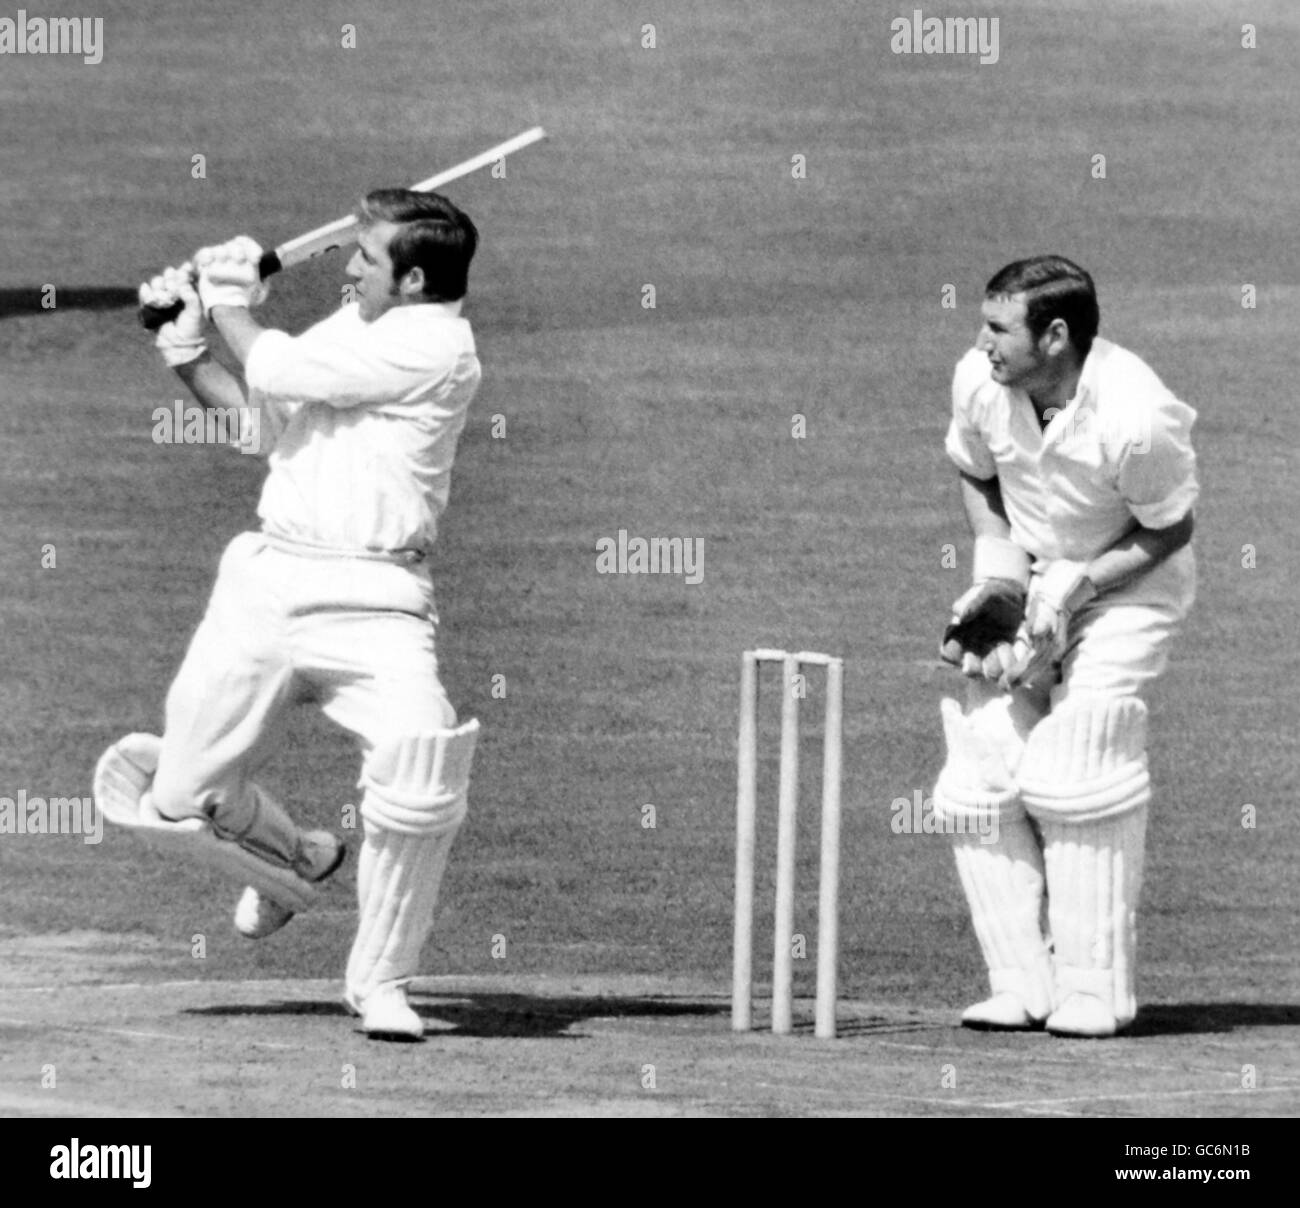 Cricket - Middlesex v Sussex - John Player League 1970 - Lord's Cricket Ground. P.H.Parfitt (Middx), plays a ball from M.A.Buss. Stock Photo